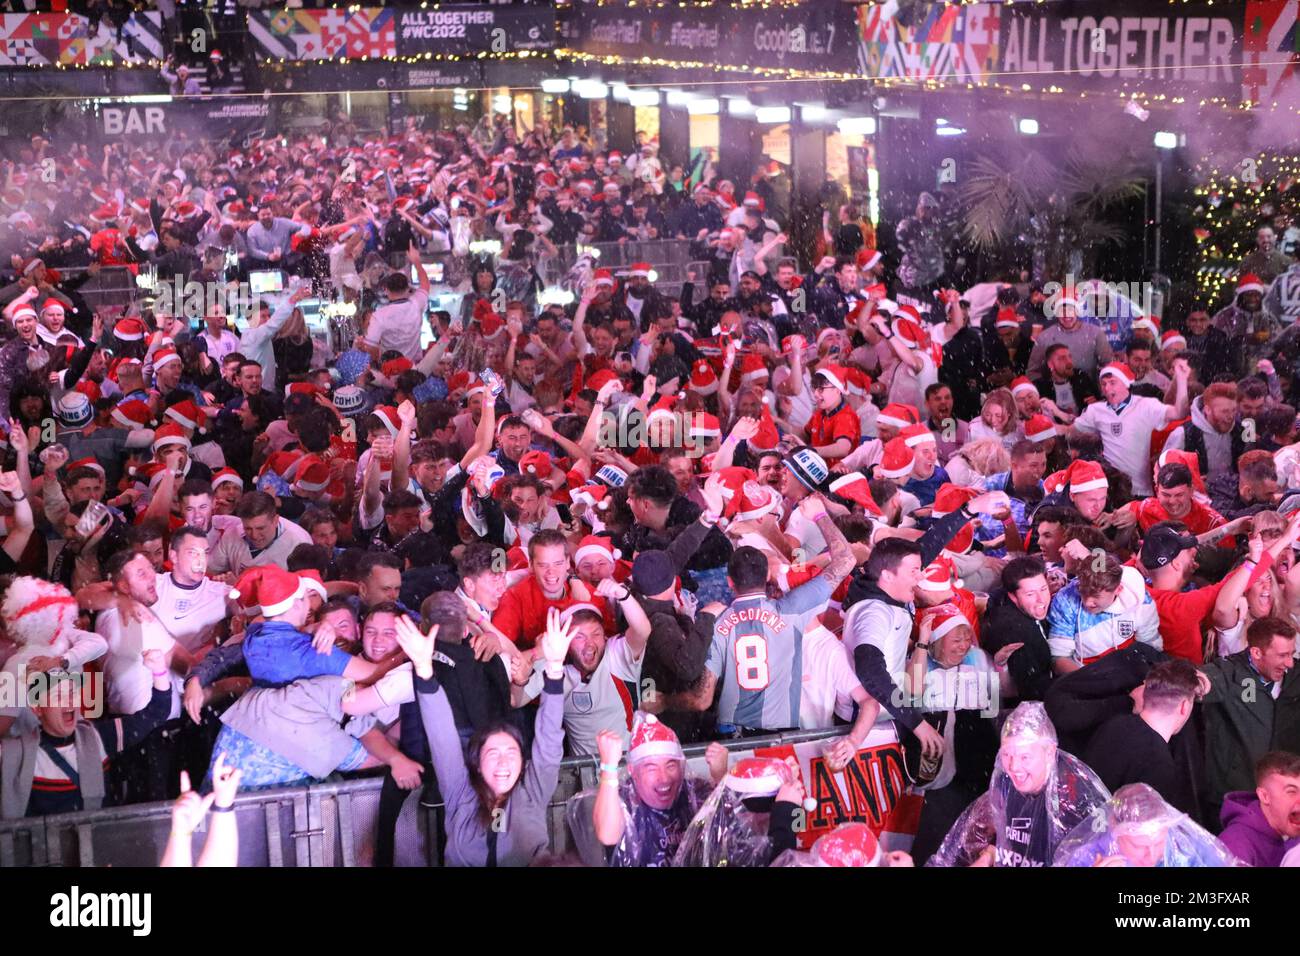 England football fans at Boxpark Wembley tonight for the World Cup match between England and Senegal.   04/12/2022  Belinda Jiao jiao.bilin@gmail.com Stock Photo